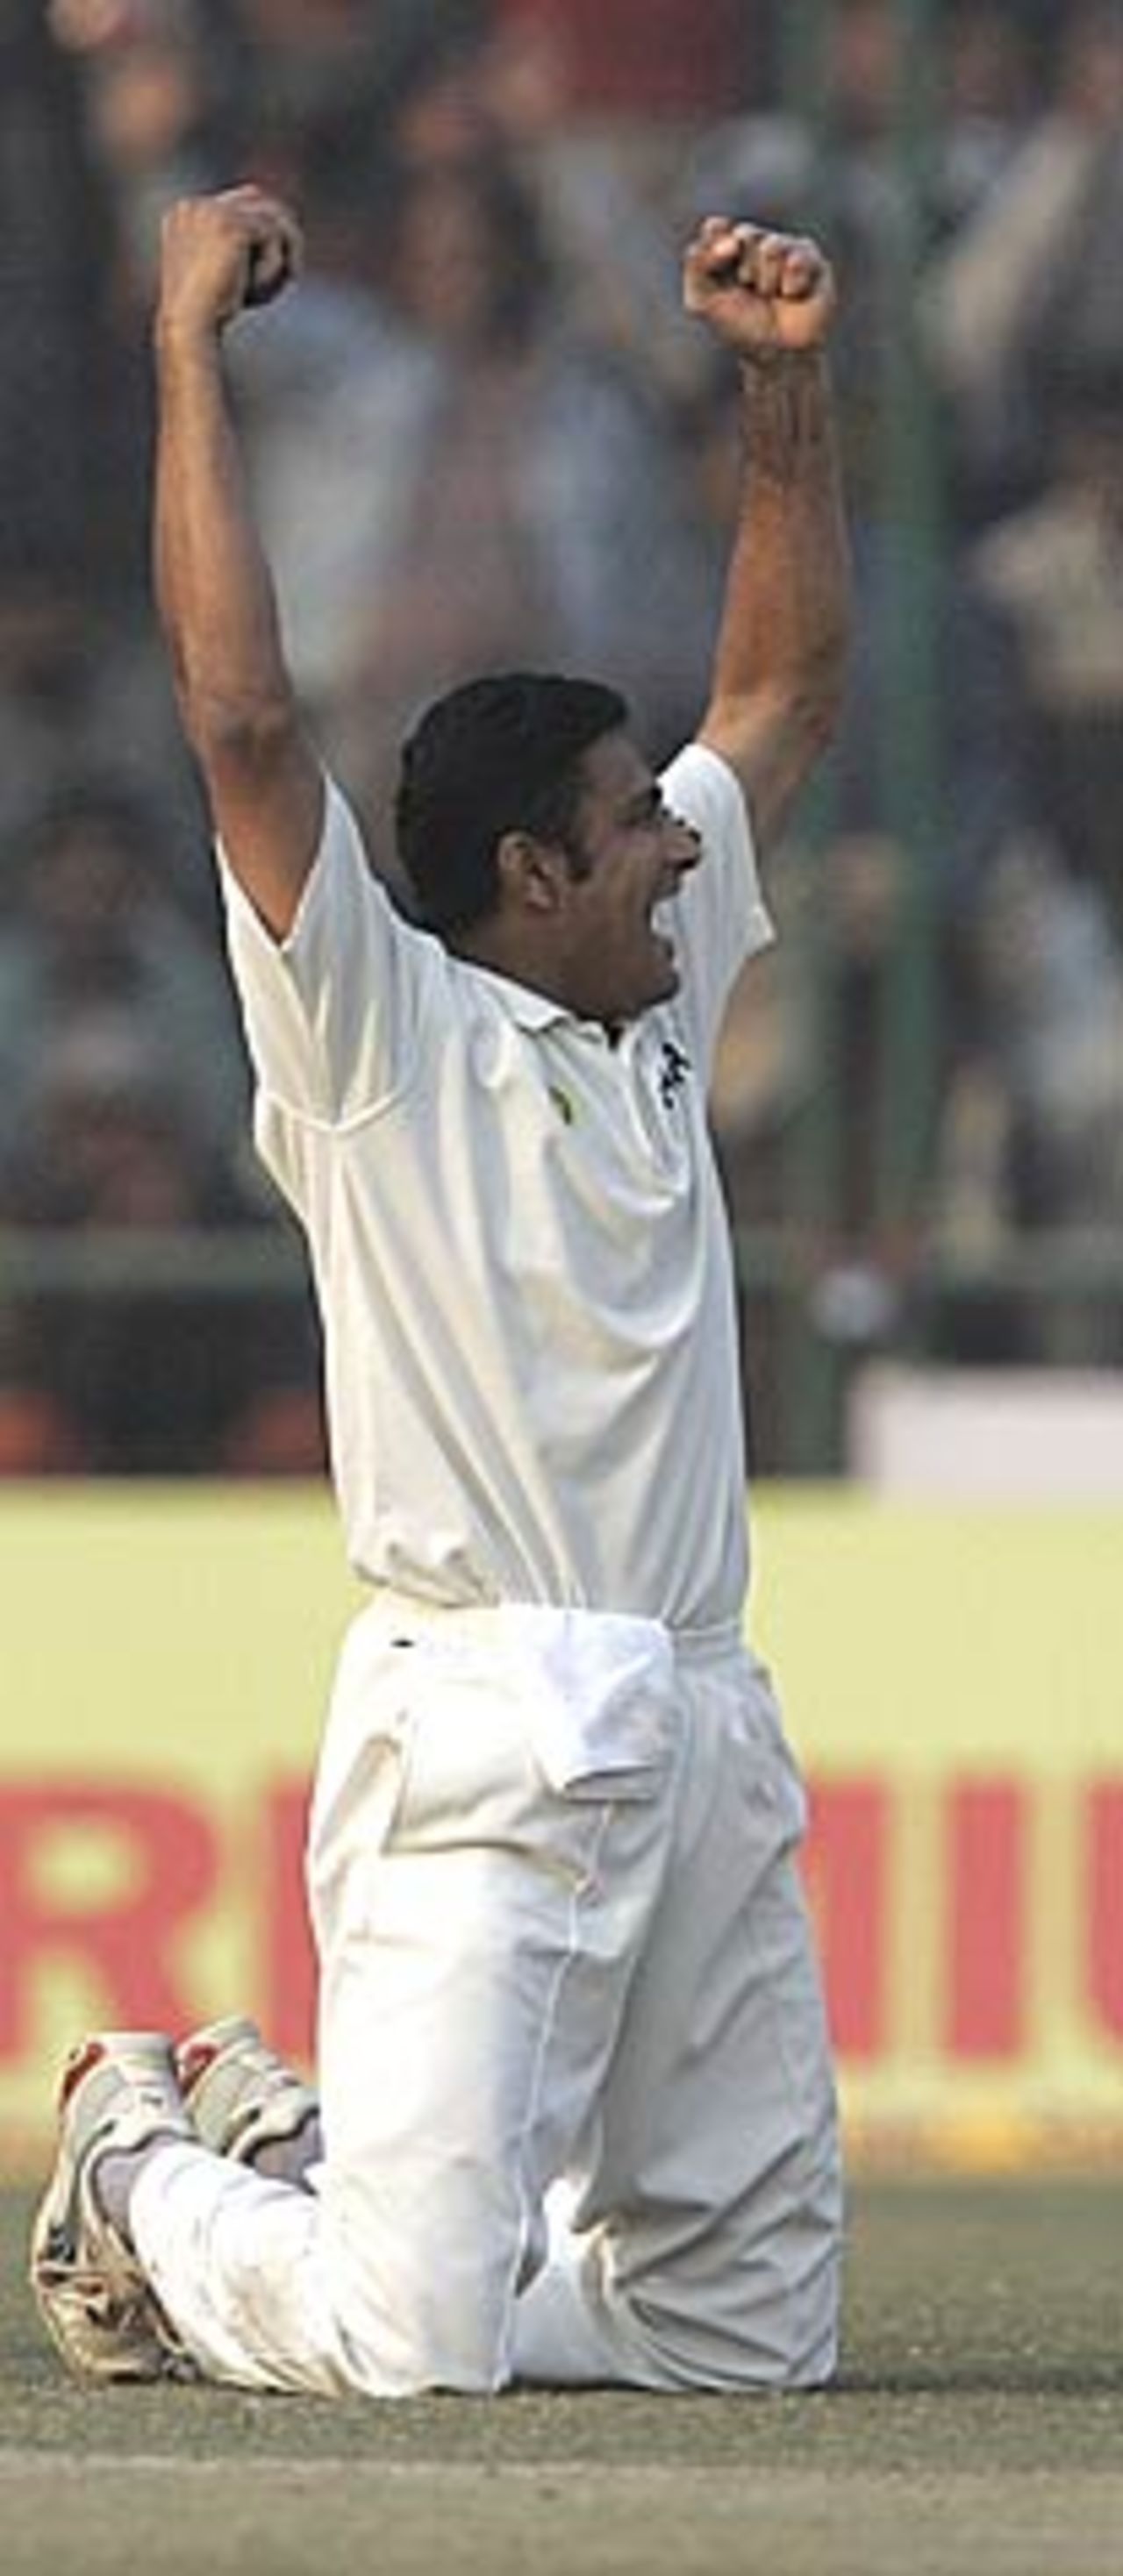 Kumble celebrates after taking an excellent low catch of his own bowling  to dismiss Marvan Atapattu, India v Sri Lanka, 2nd Test, Delhi, 3rd day, December 13, 2005